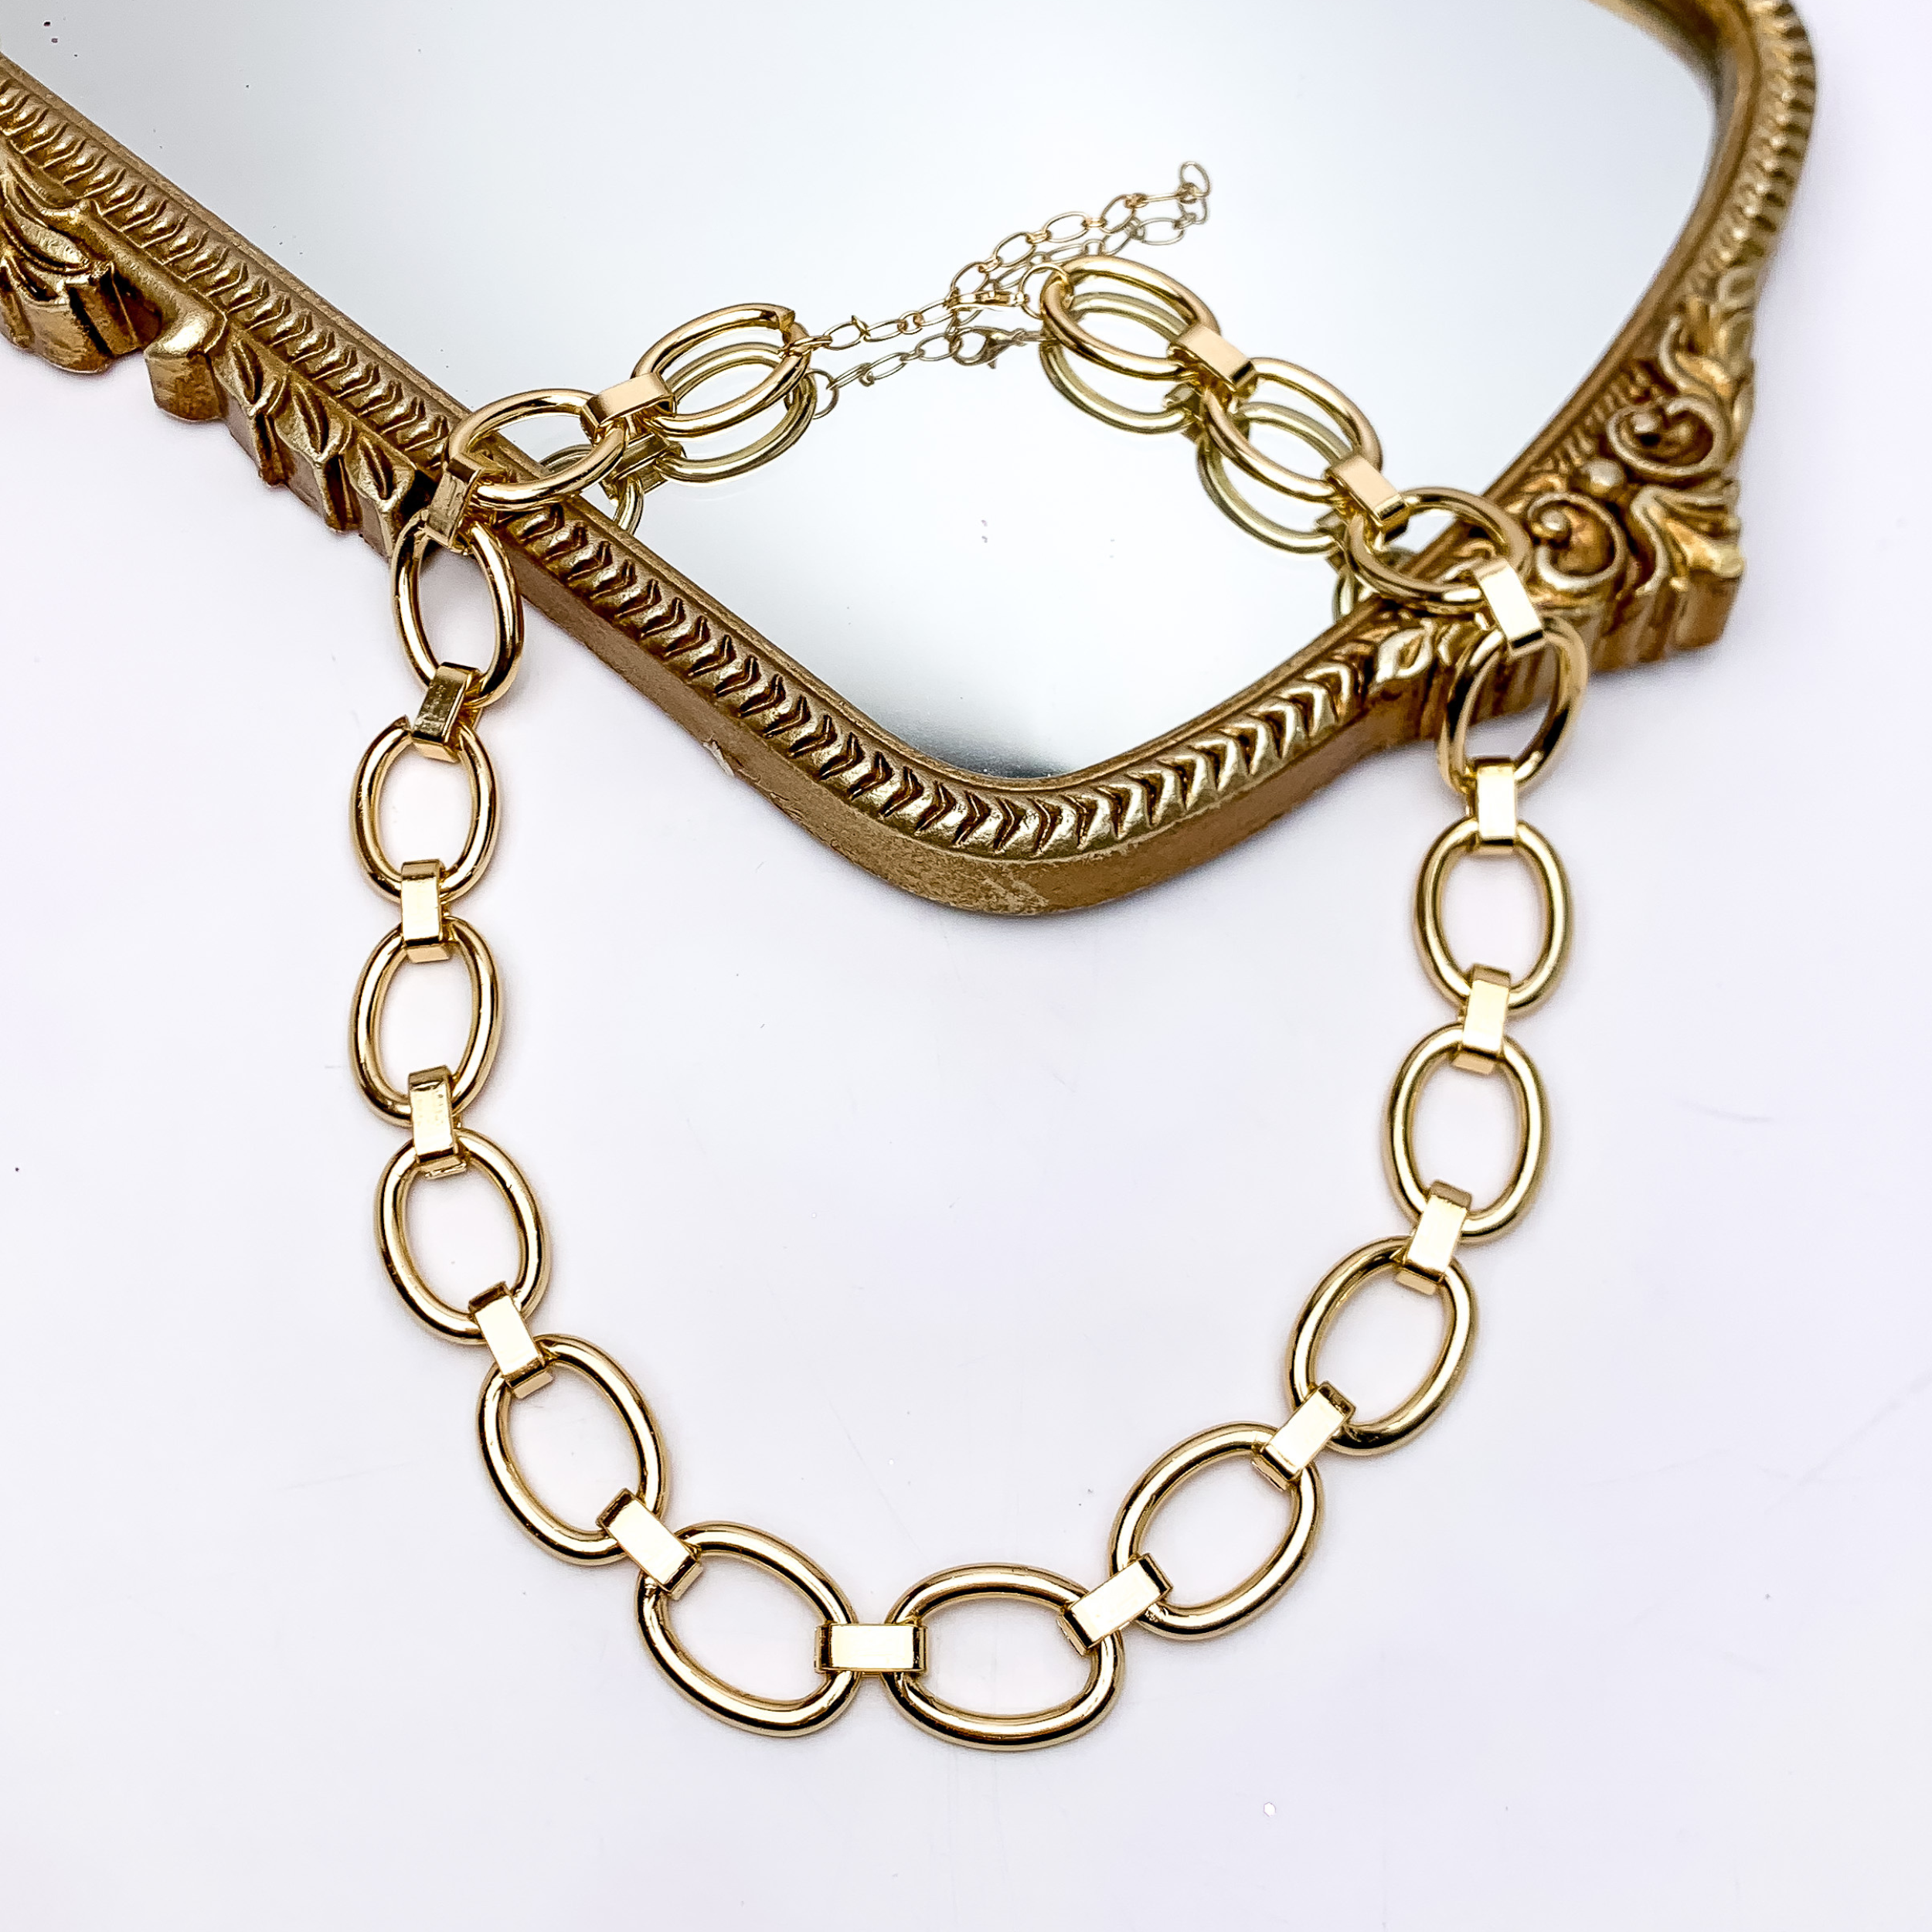 Gold Tone Chain Necklace With Spacers. Pictured on a white background with part of the necklace on a gold framed mirror.